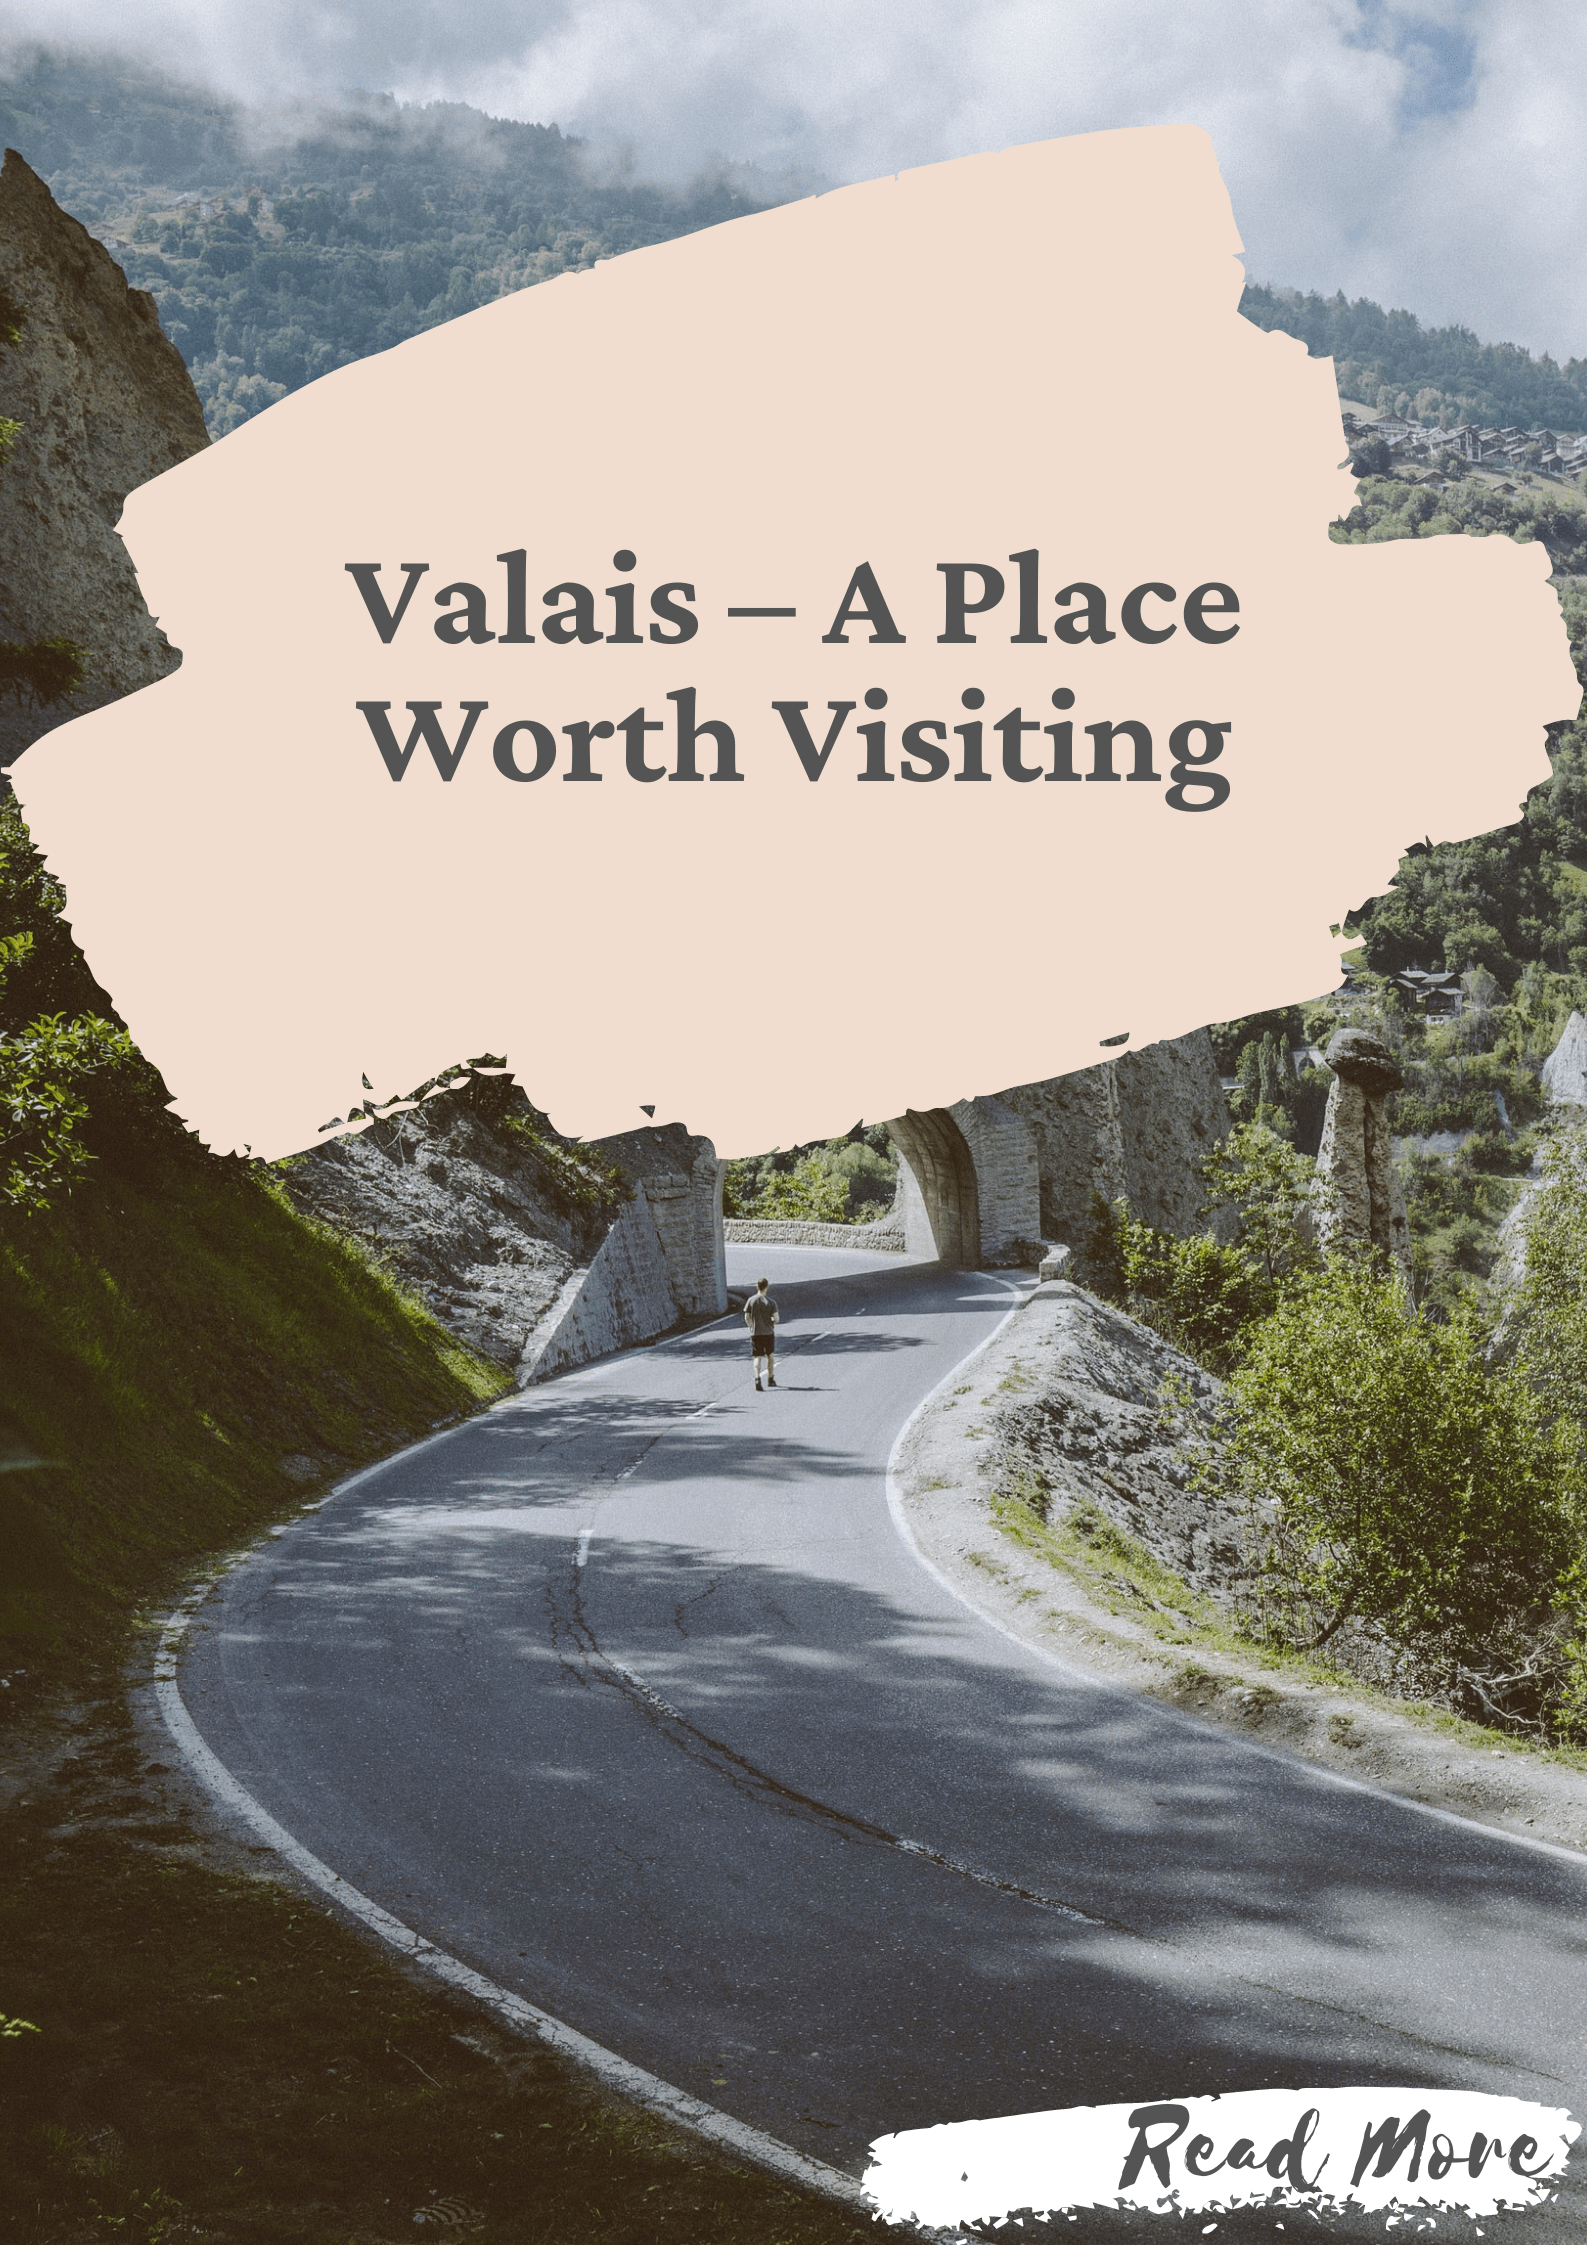 Valais - A Place worth Visiting